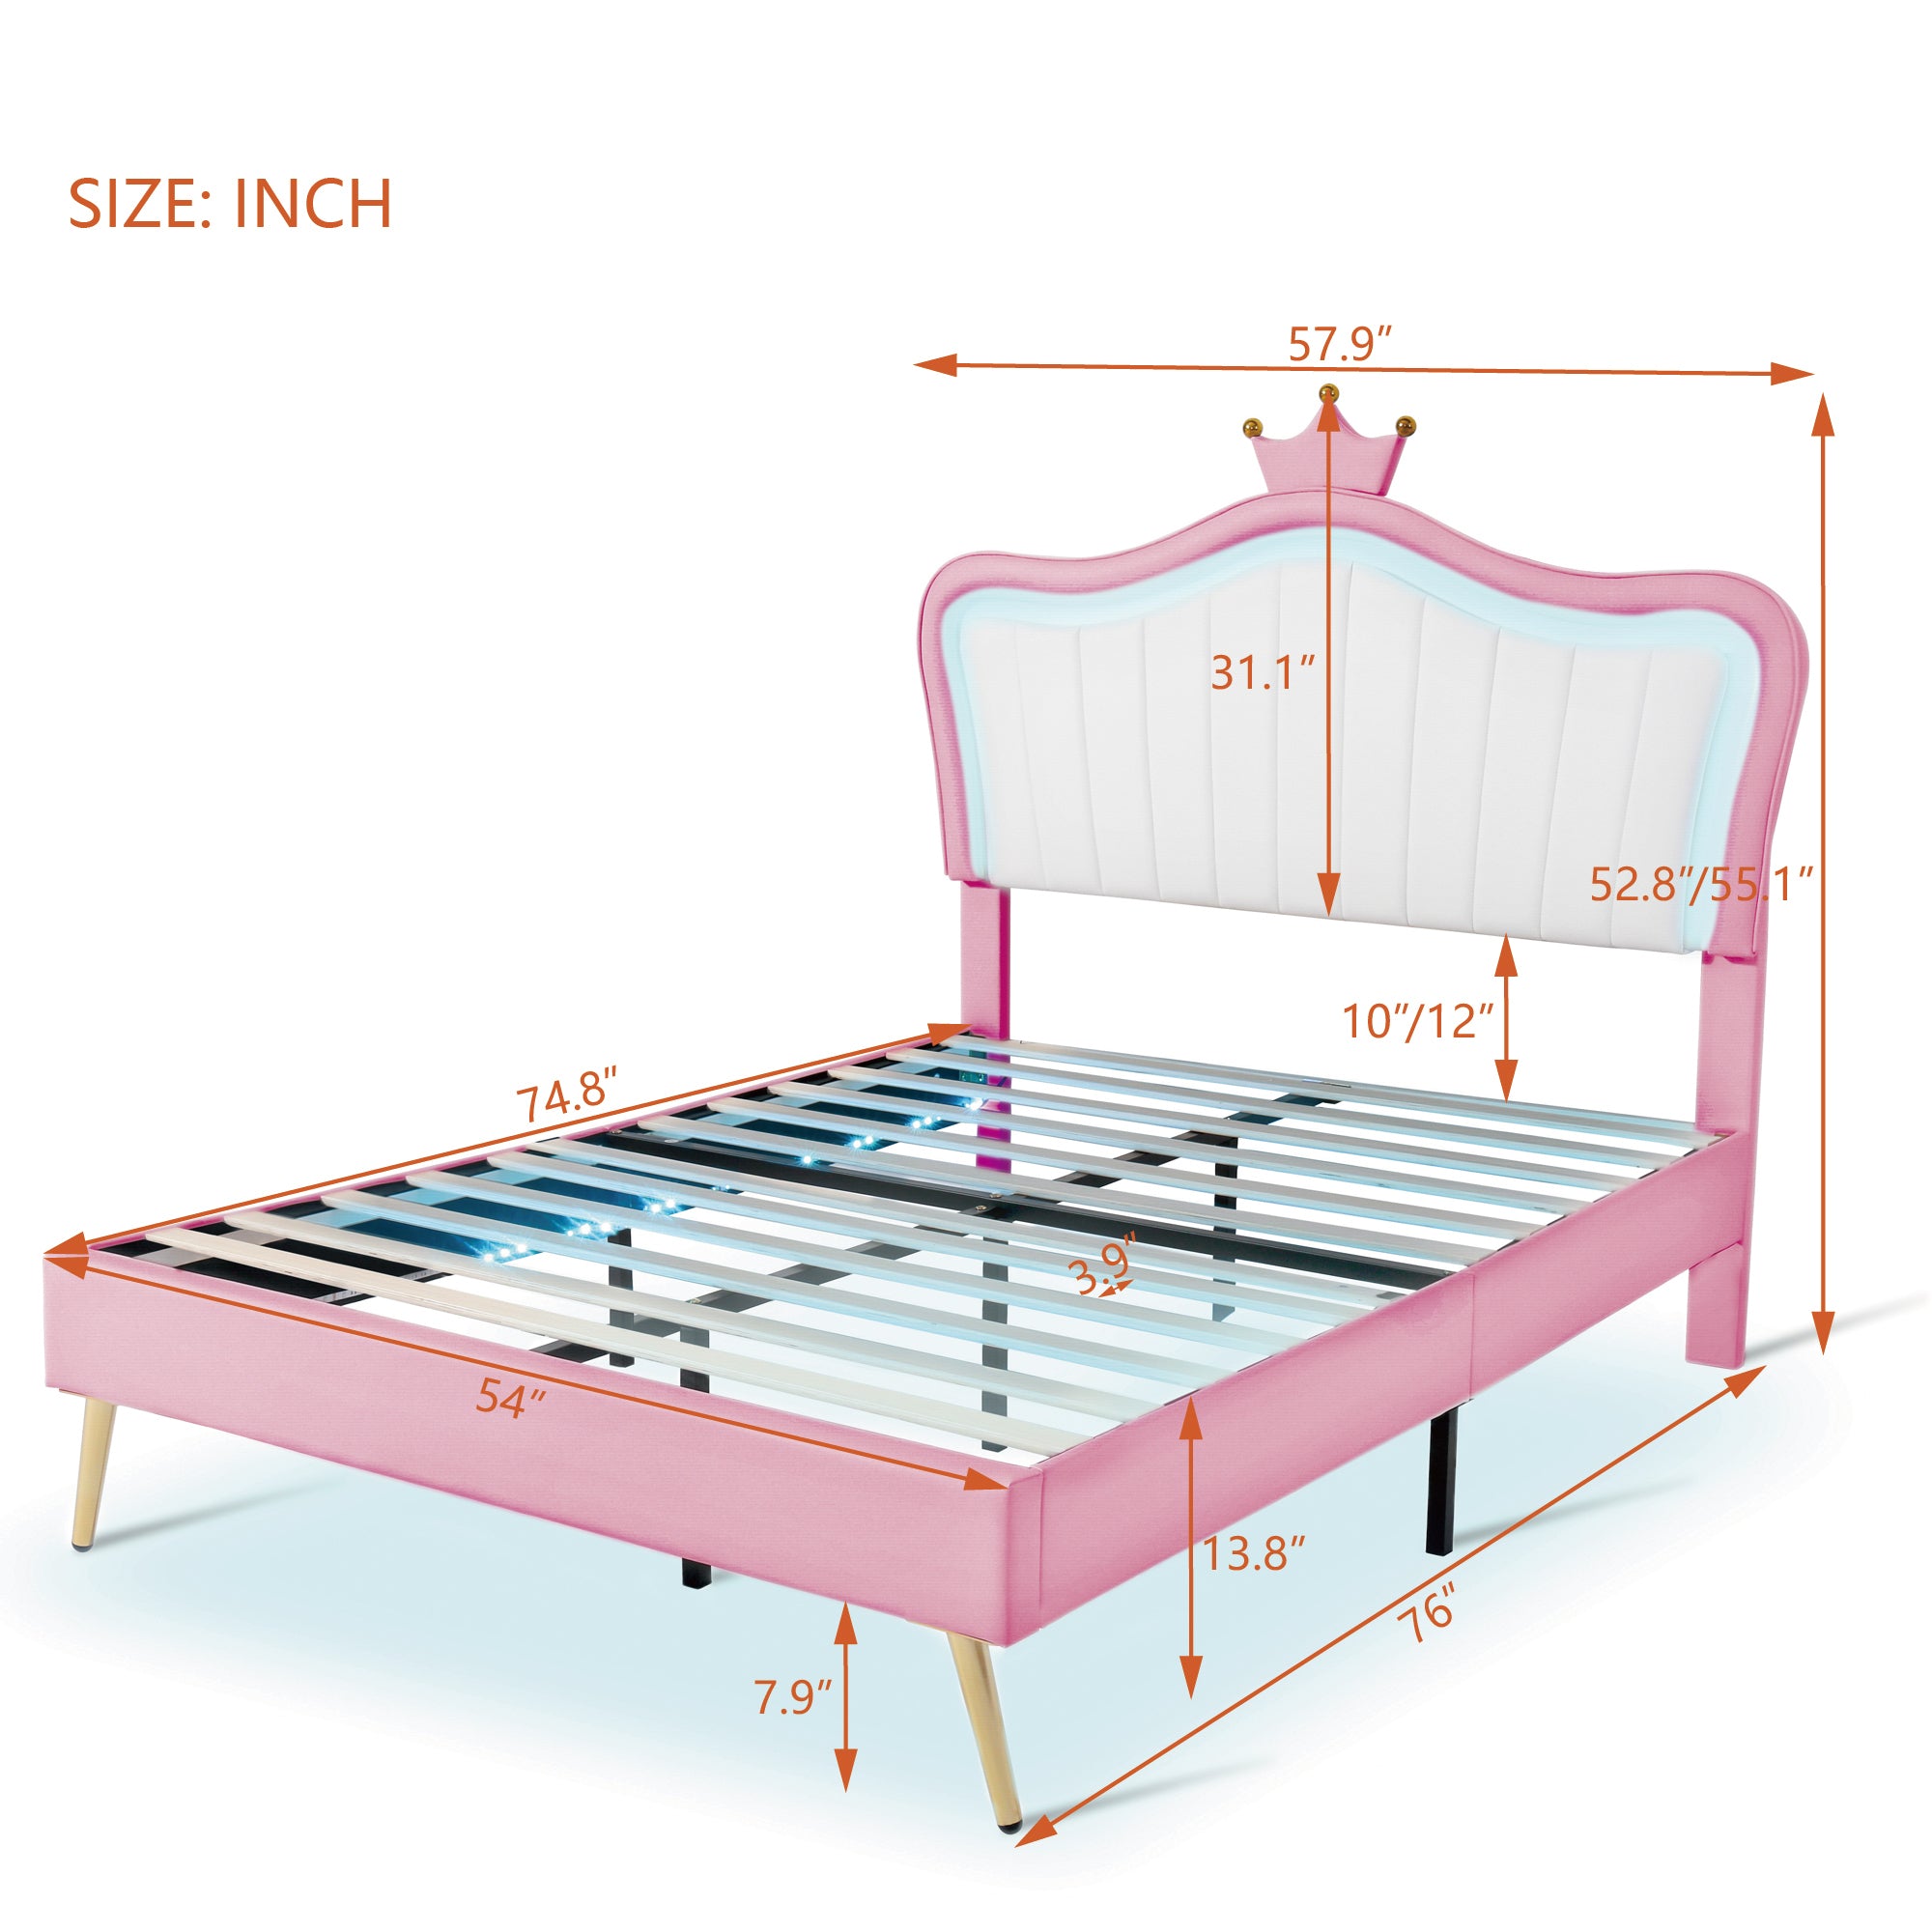 Sofia Pink and White Faux Leather Full Size Platform Bed with Crown and LED Light